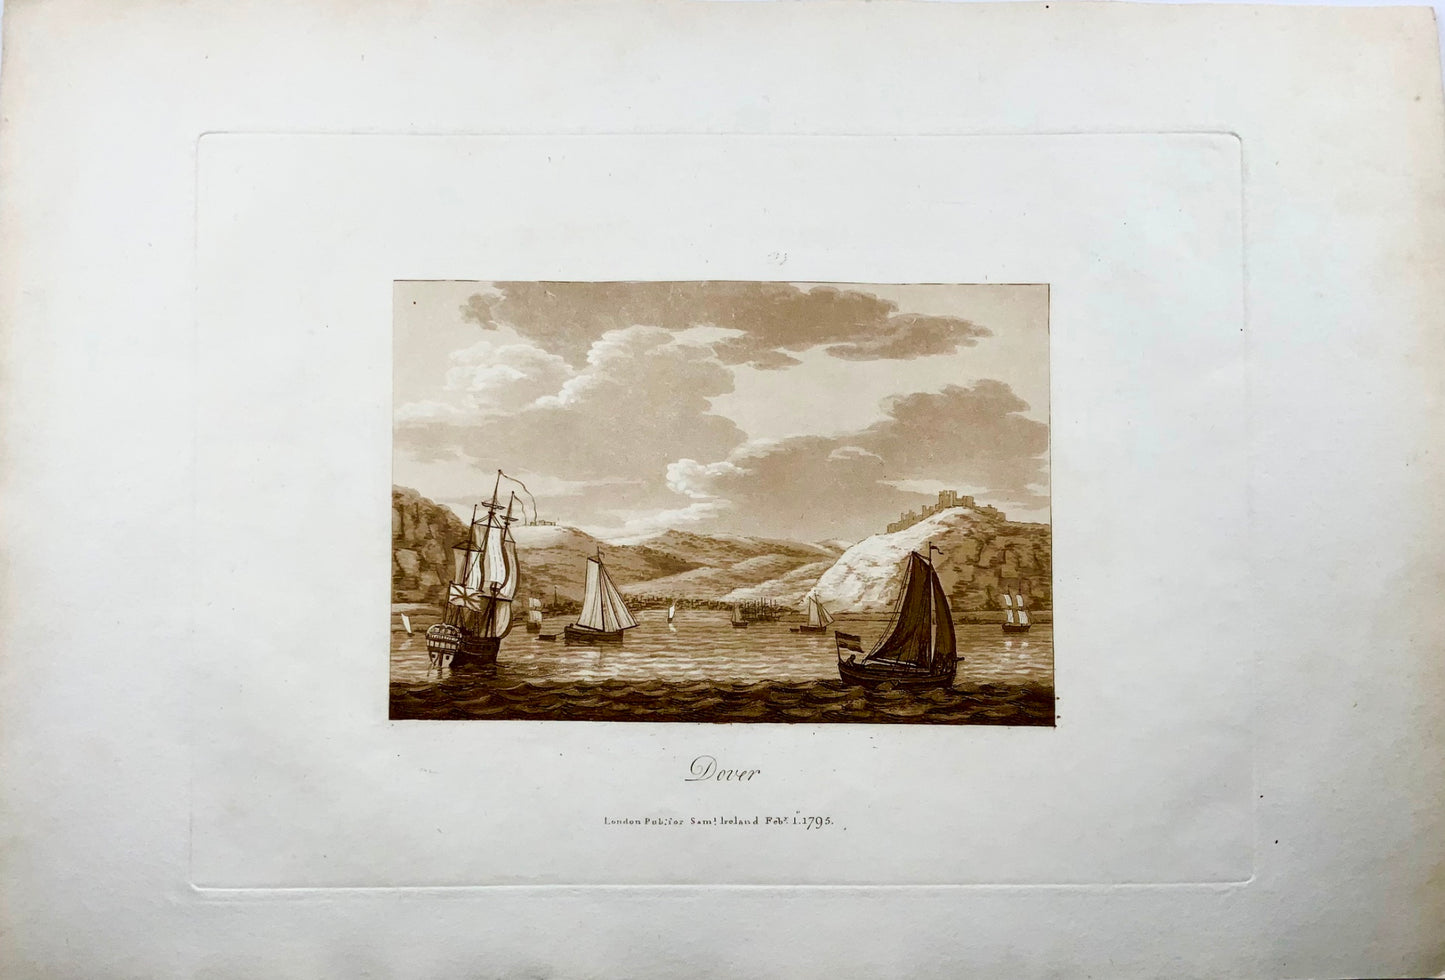 1795 Dover from the Sea, England, sepia aquatint by Sam. Ireland, large paper